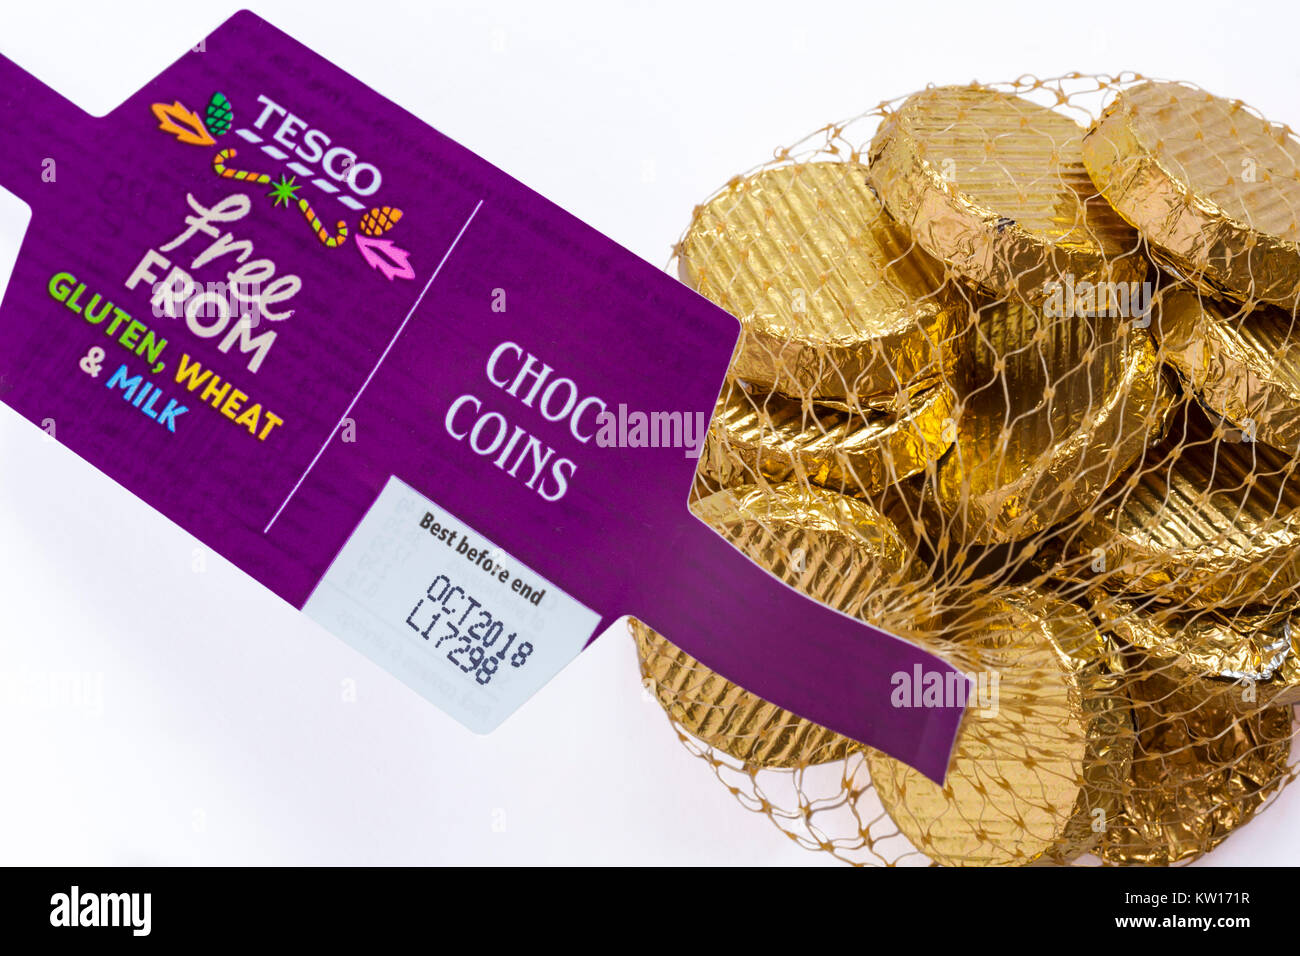 Net of Tesco choc coins free from gluten wheat & milk in netted bag set on white background Stock Photo